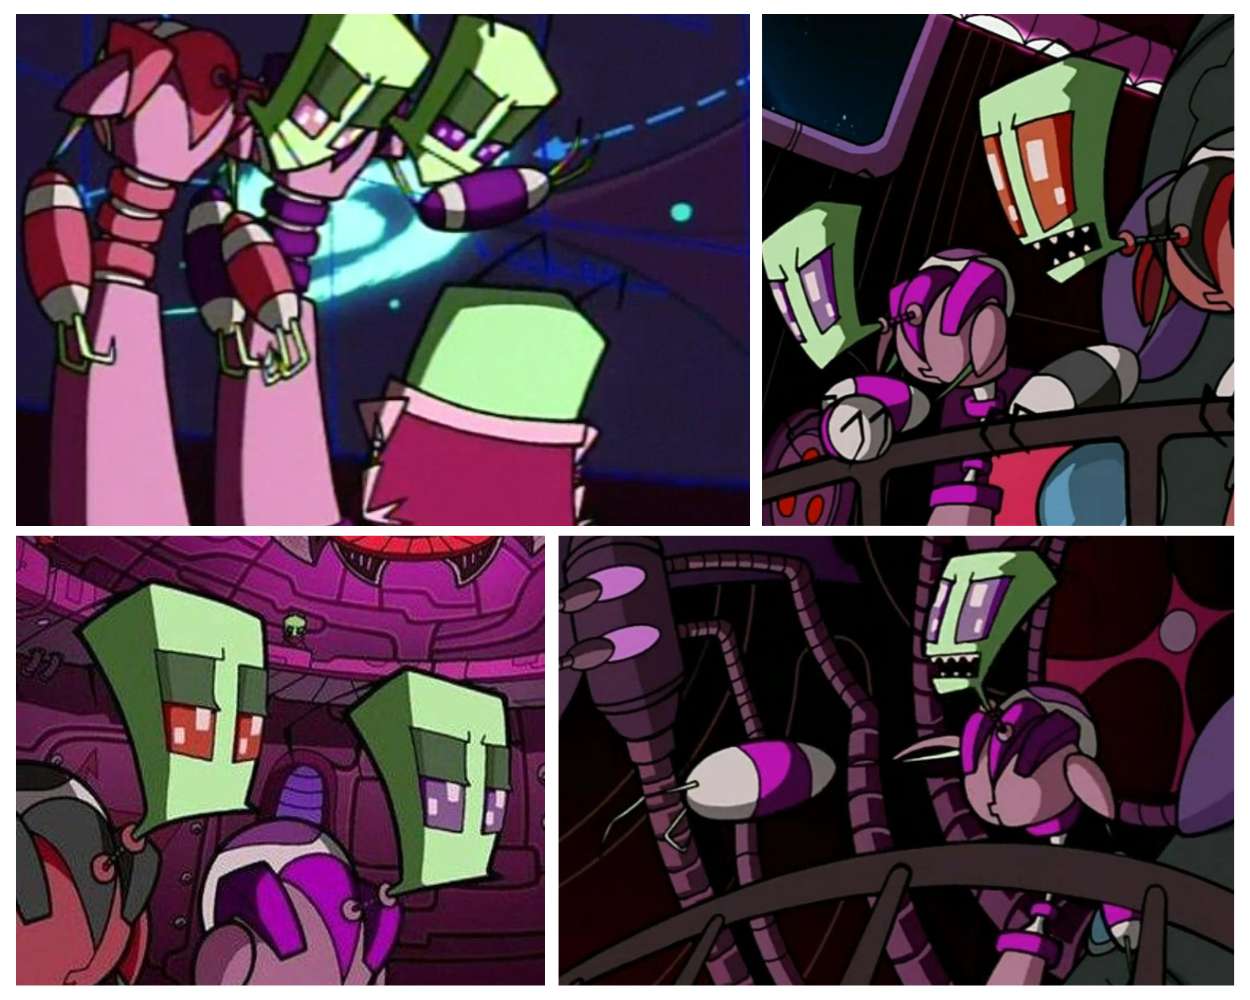 The Almighty Tallest from invader zim